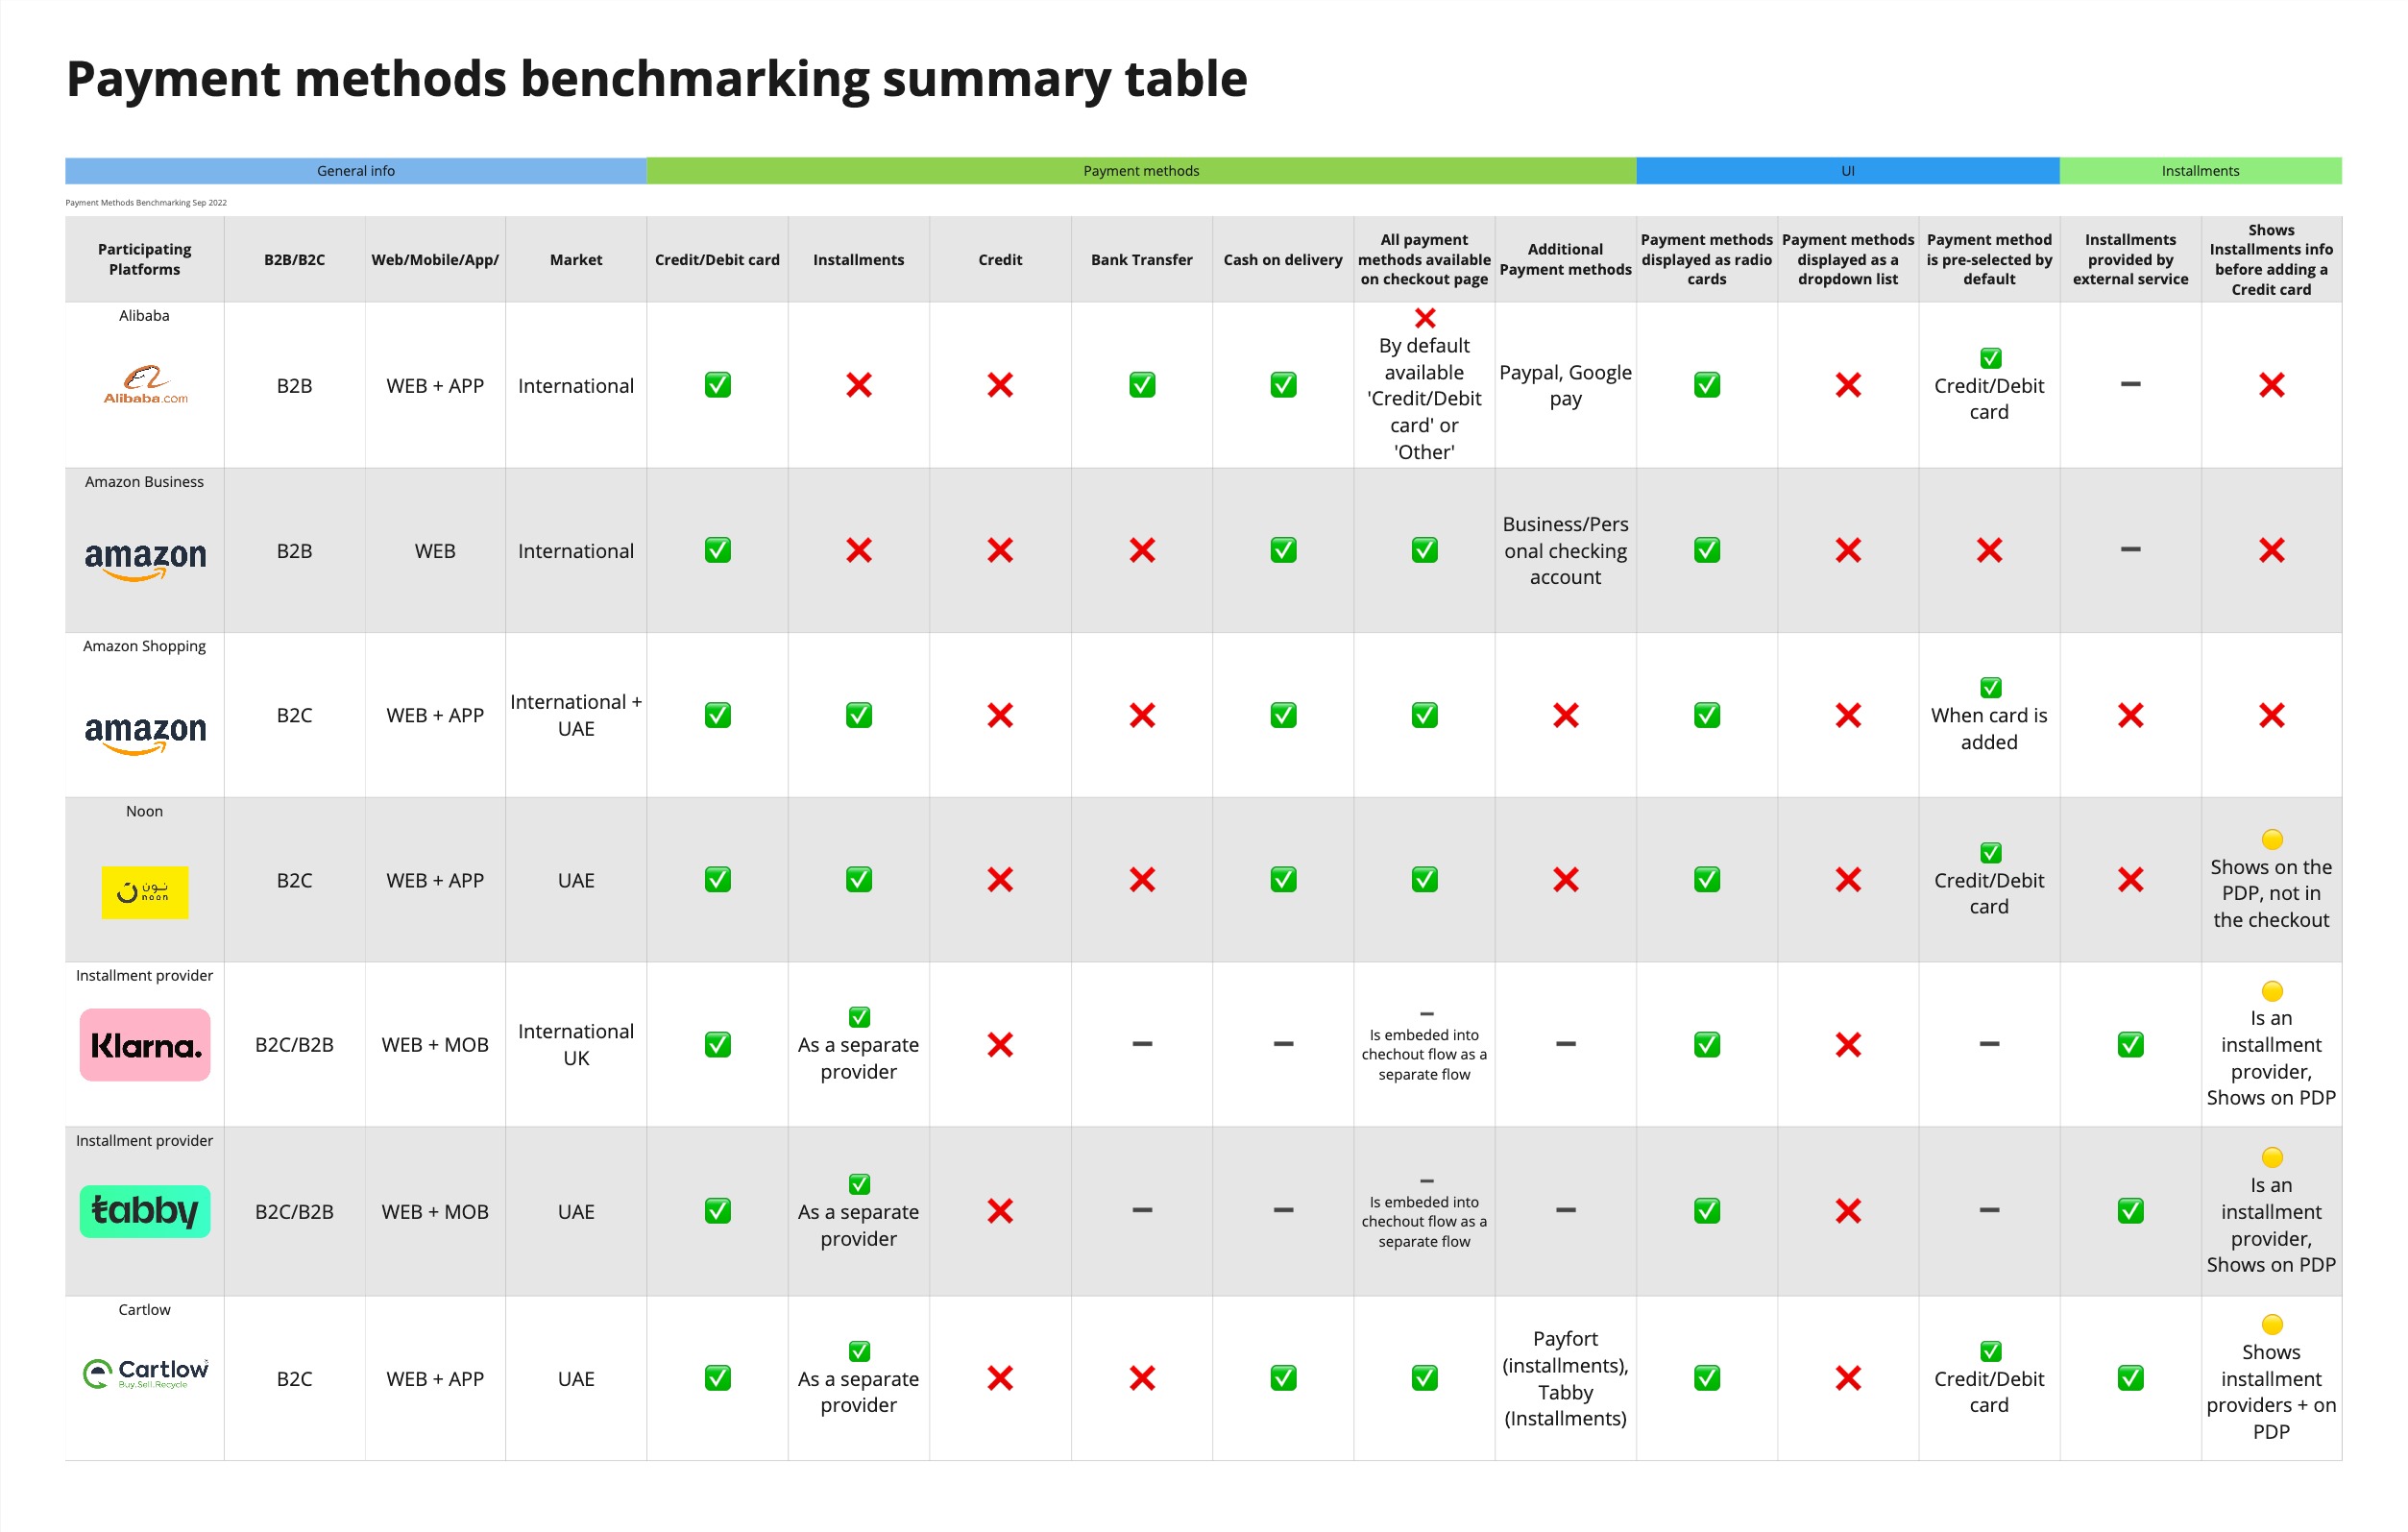 Payment methods benchmarking: summary table